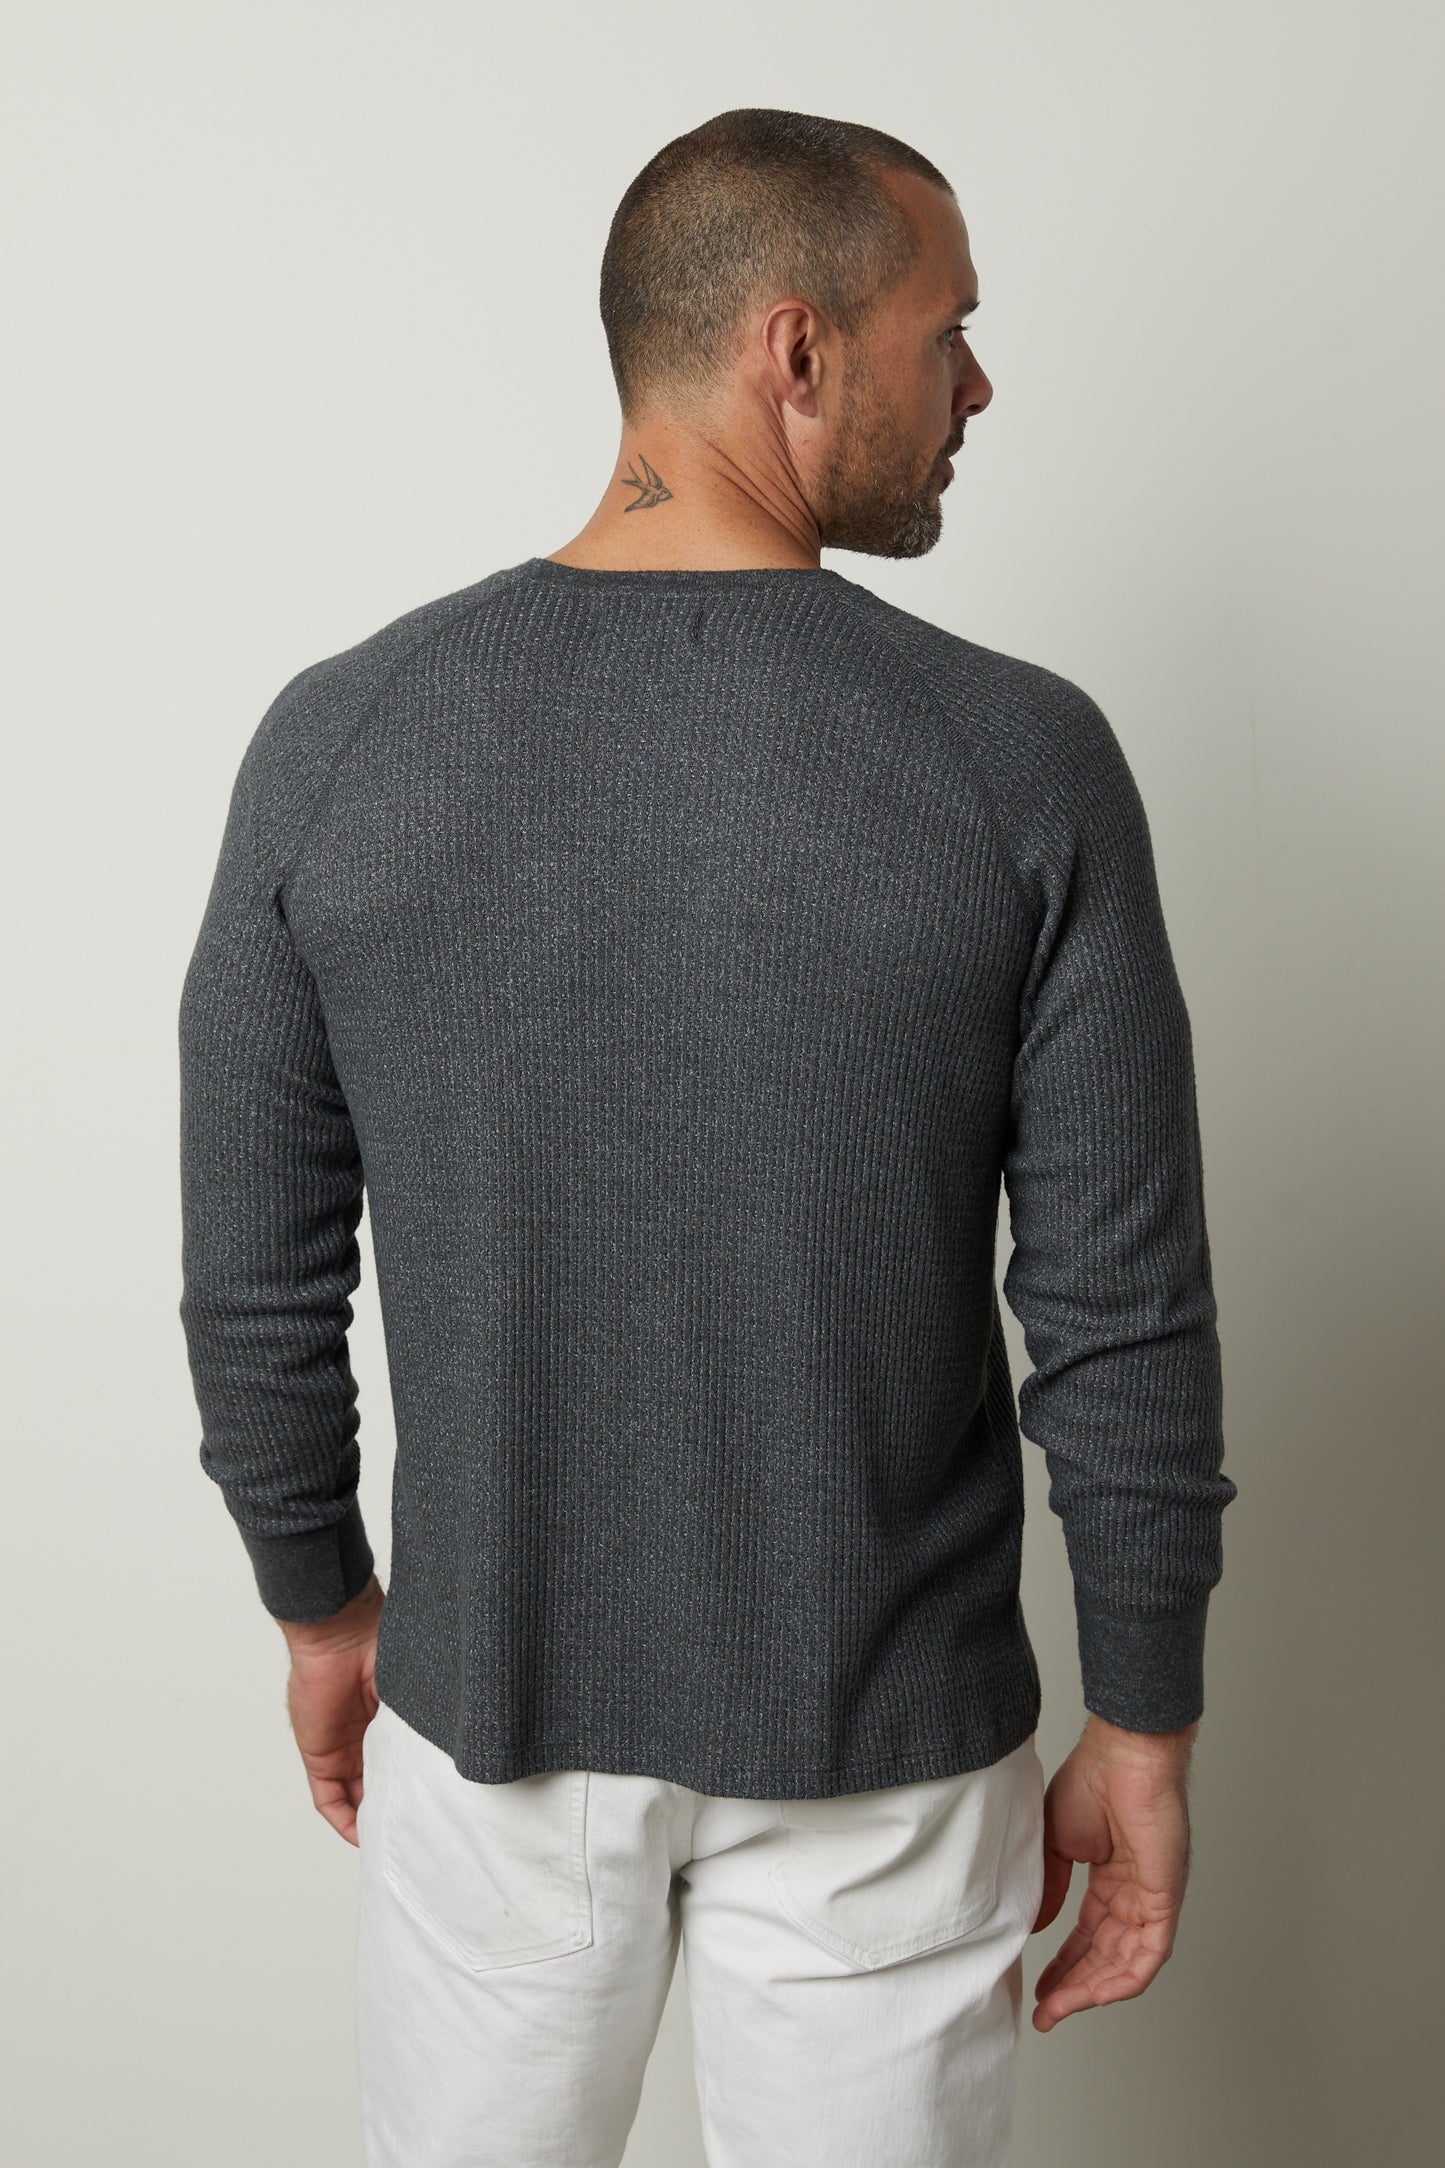 The back view of a man wearing a Velvet by Graham & Spencer Anthony Thermal Henley and white pants with a button-placket.-35547473936577